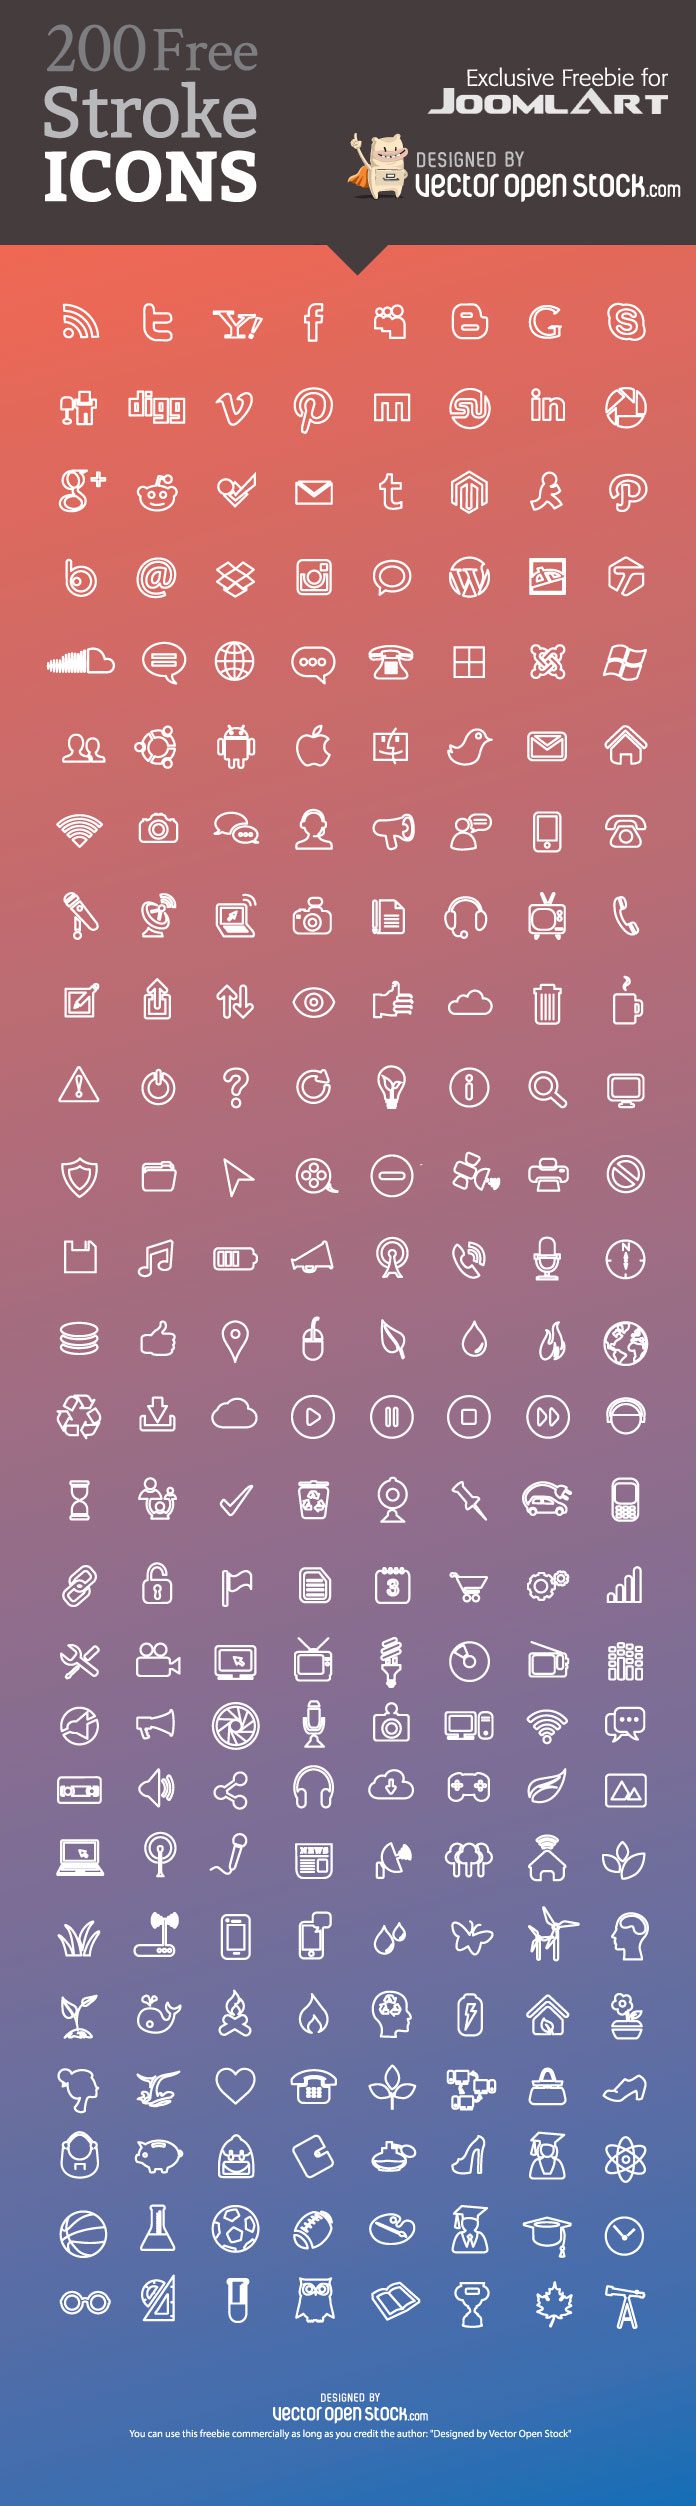 Preview of the Freebie - 200 stroke icons set from Vector Open Stock